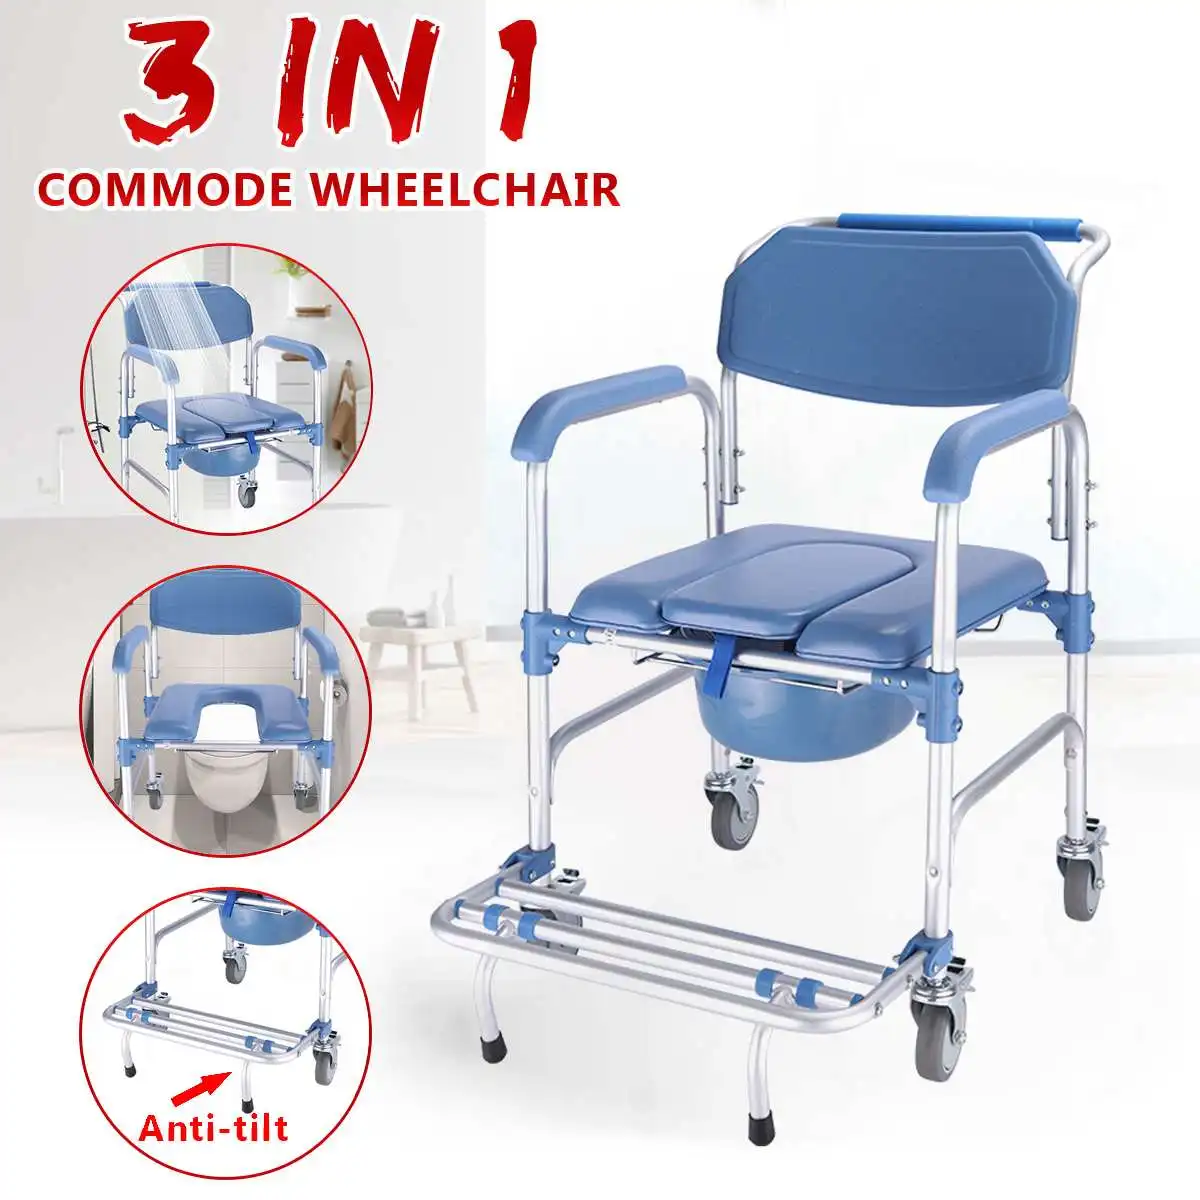 3 In 1 Commode Wheelchair Bedside Toilet Shower Seat Bathroom Rolling Chair Aluminum Alloy Wheelchair Waterproof Comfortable Bathroom Chairs Stools Aliexpress